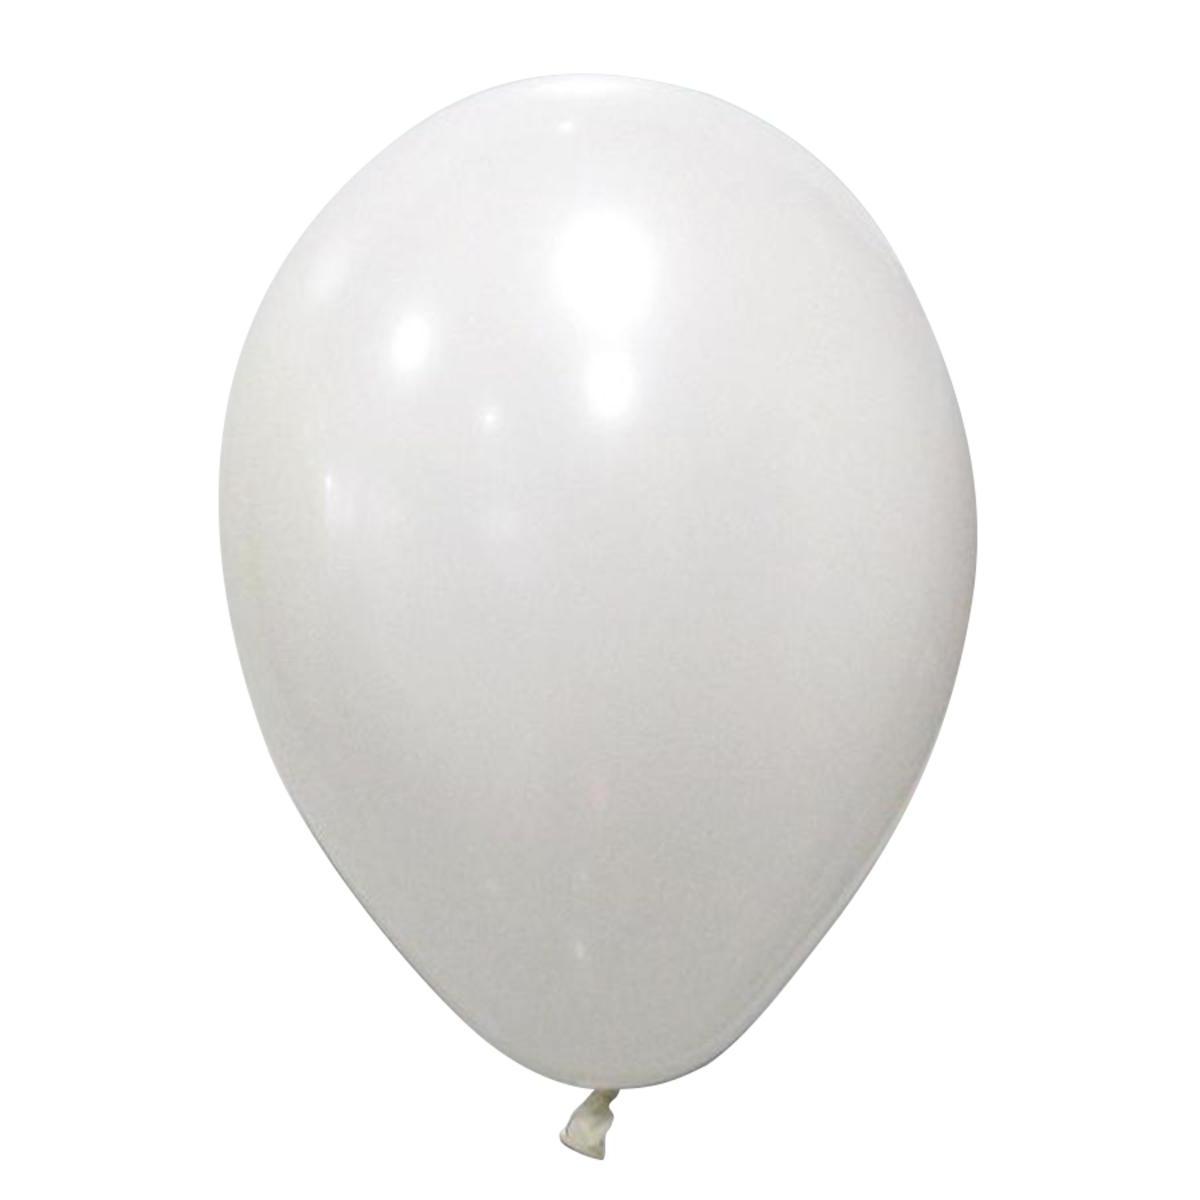 10 ballons gonflables opaques - Latex - Blanc